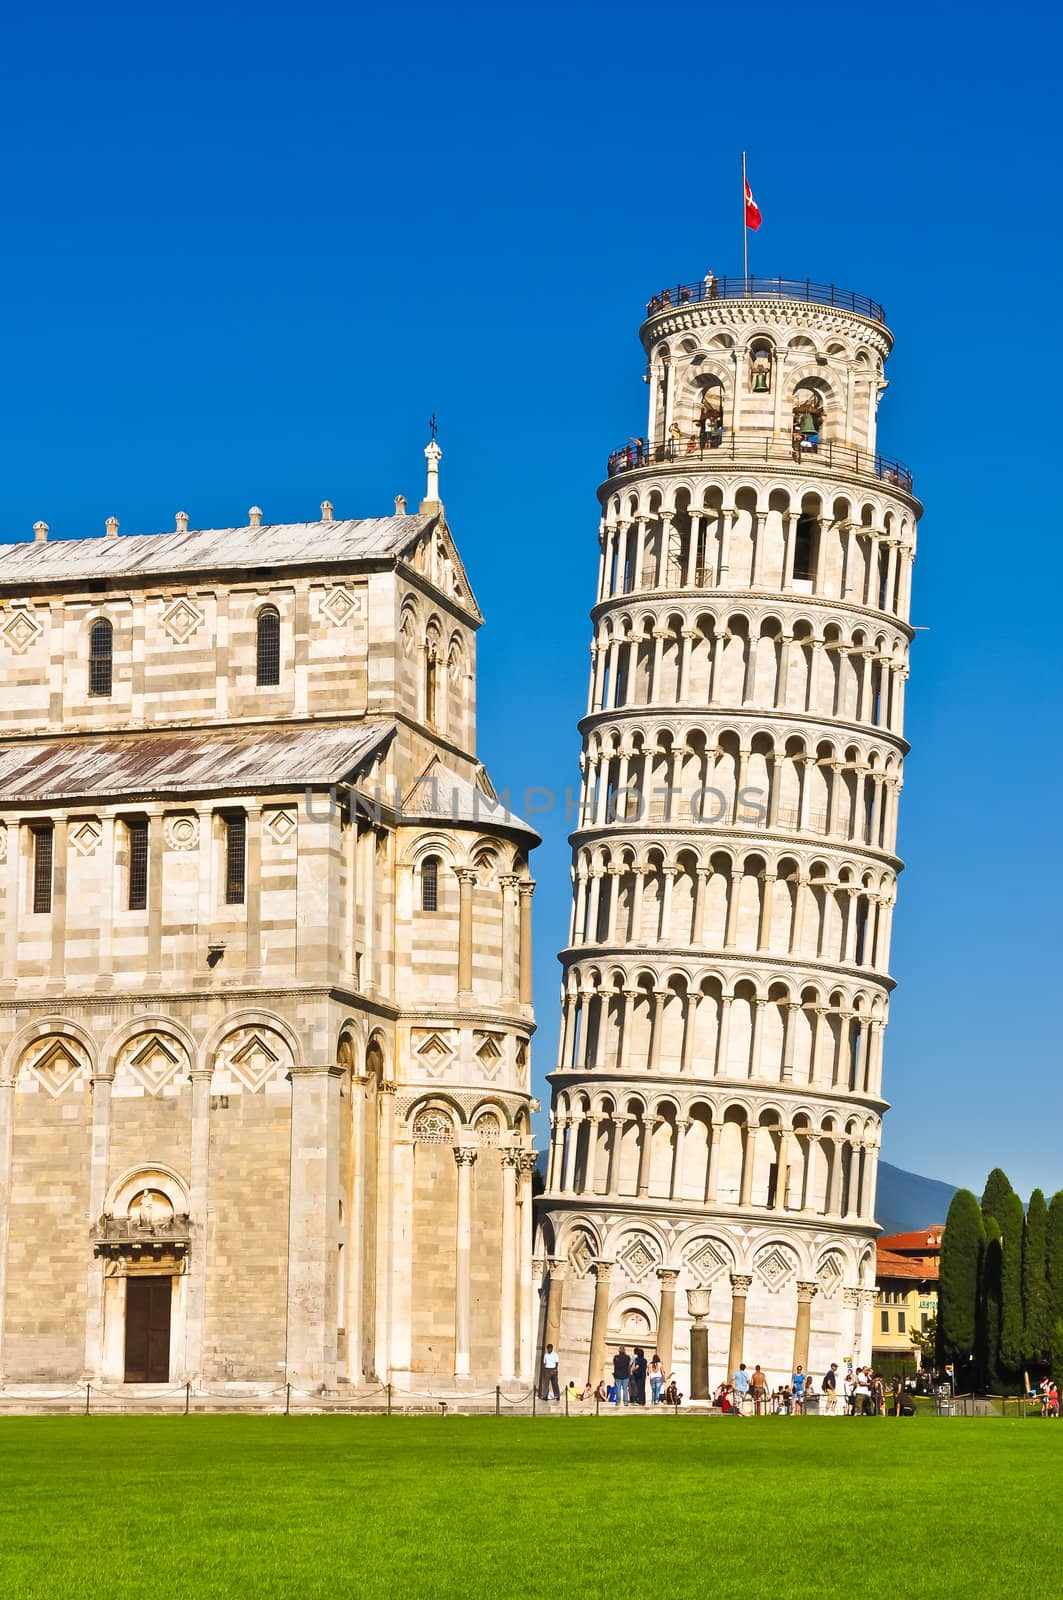 Leaning tower of Pisa, Tuscany, Italy, day view